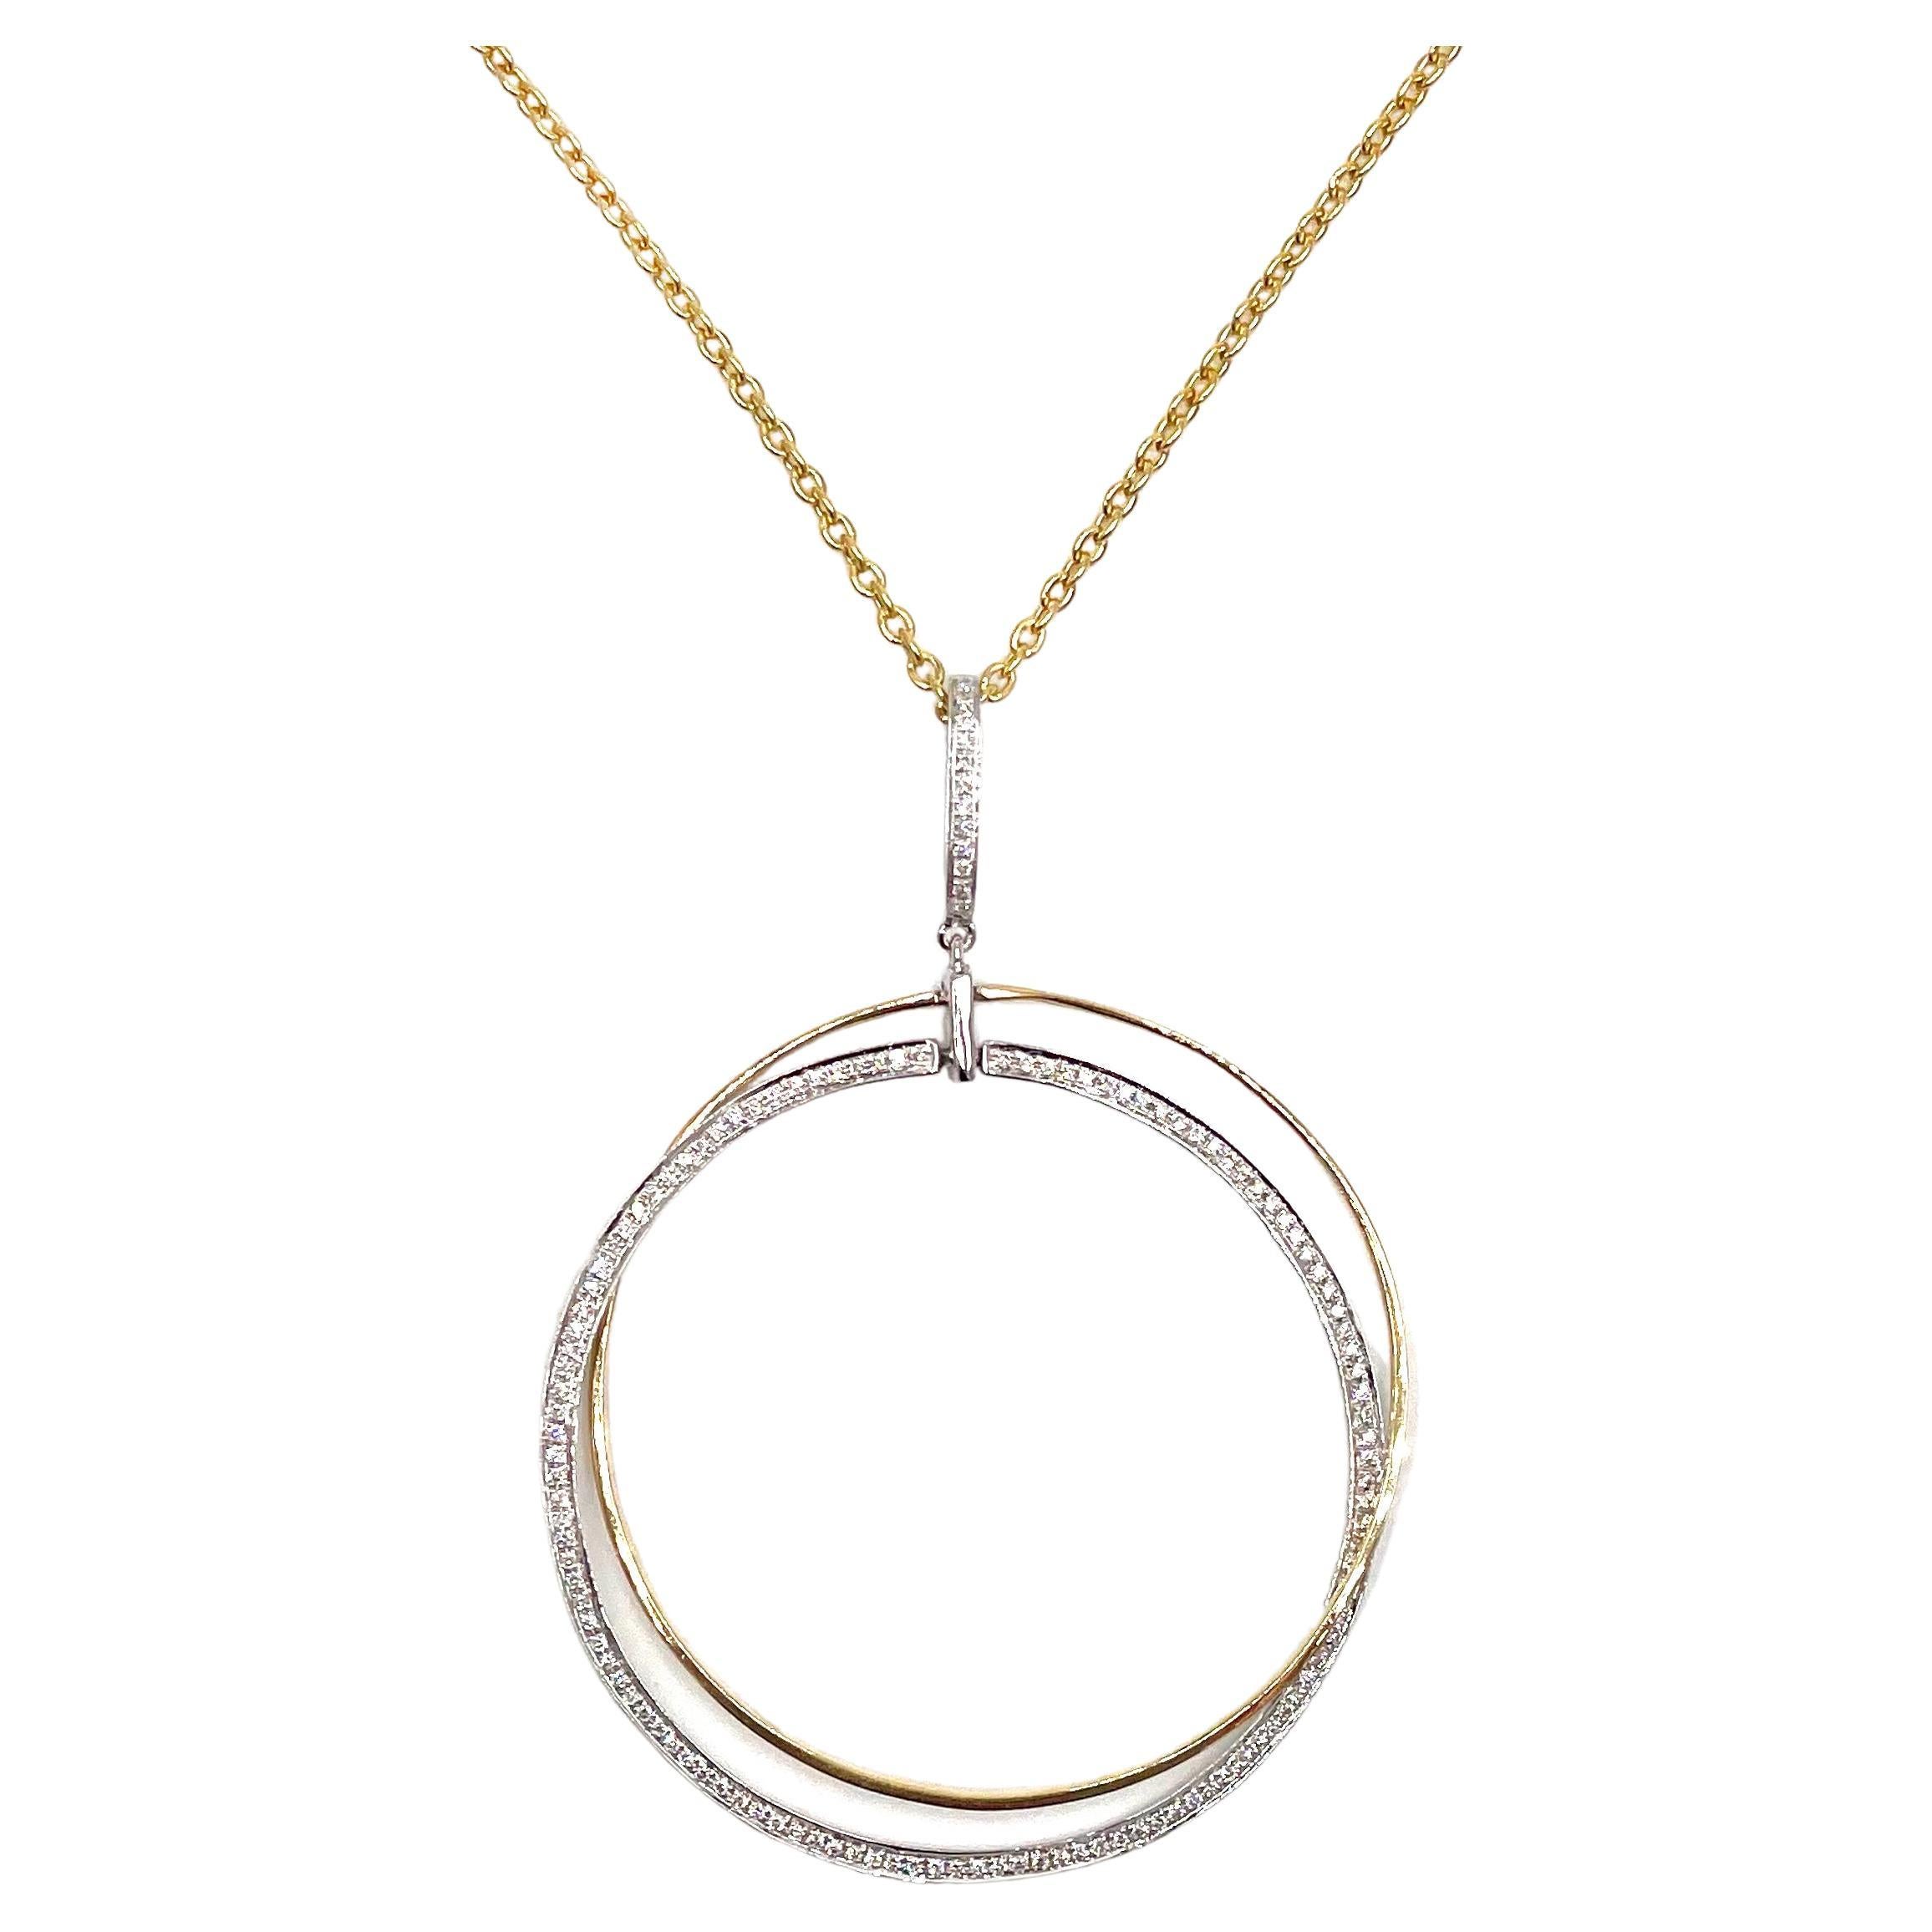 18K Yellow and White Gold Circle Necklace with Diamonds